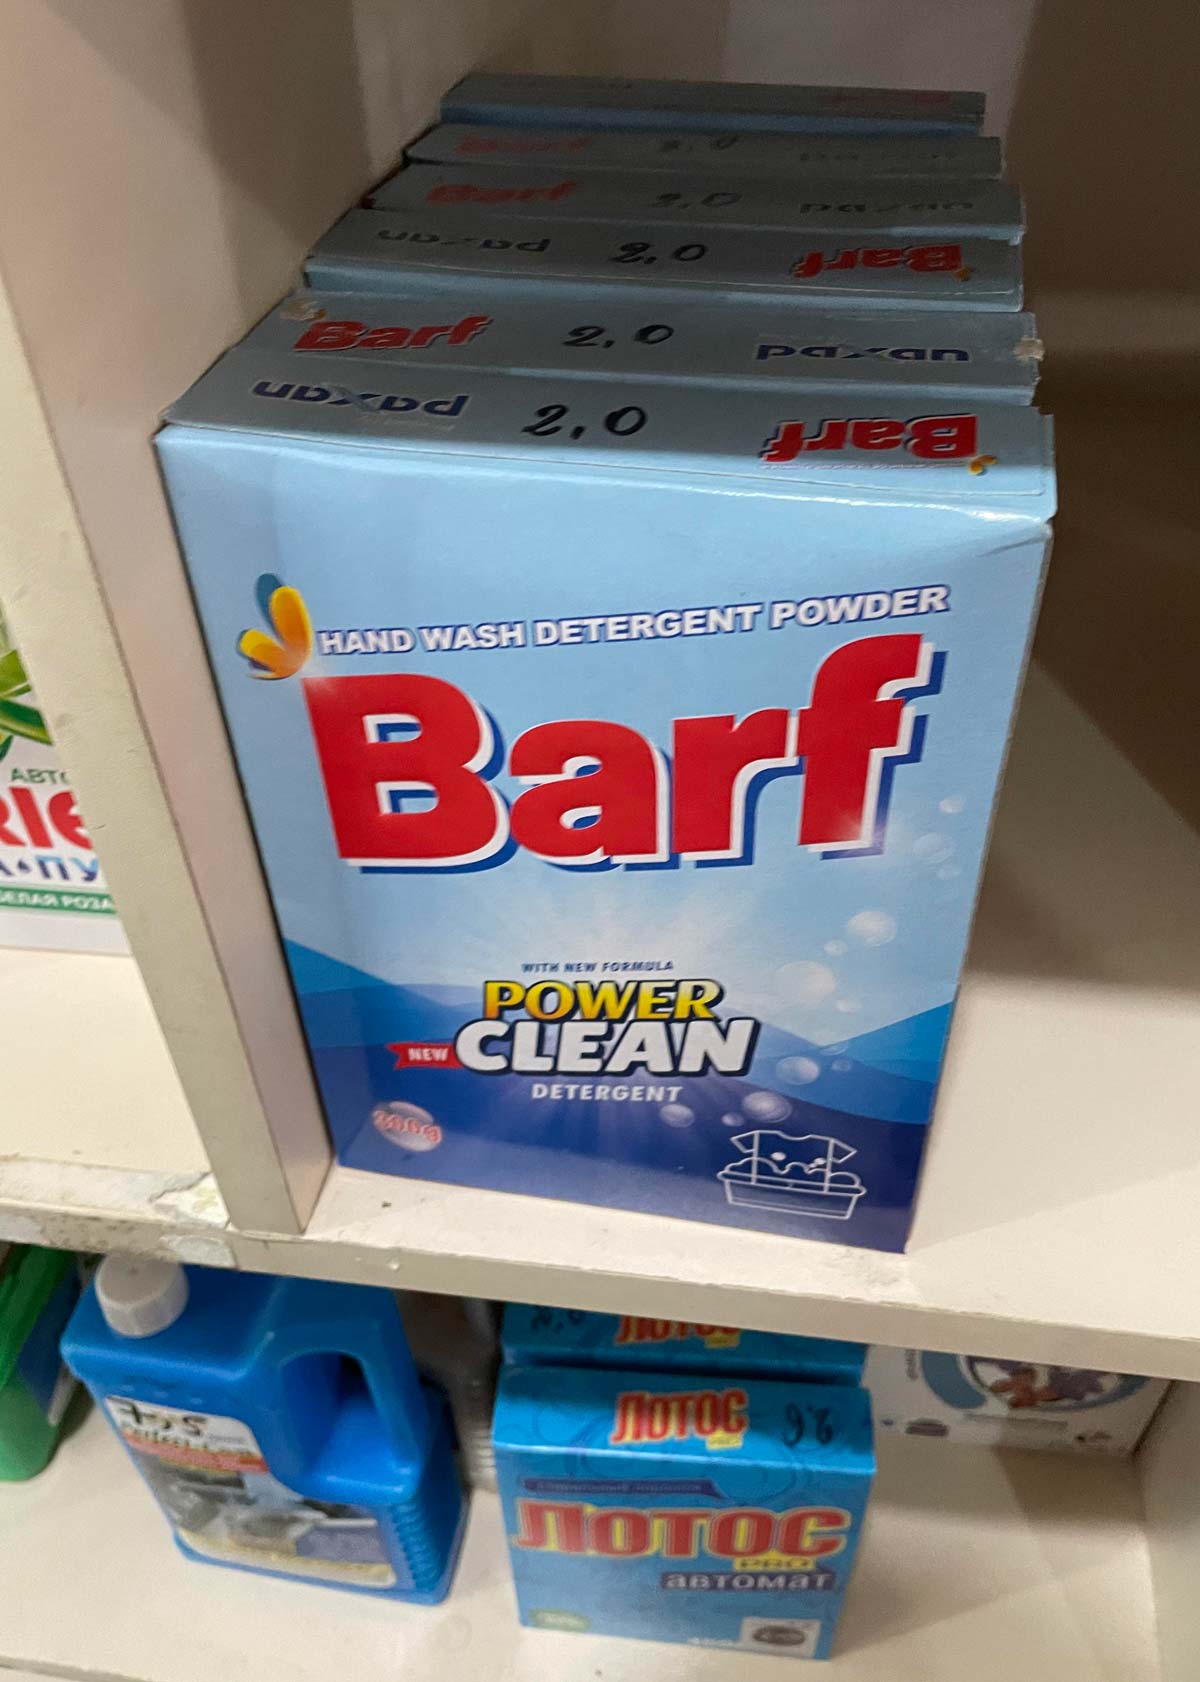 The name of this detergent